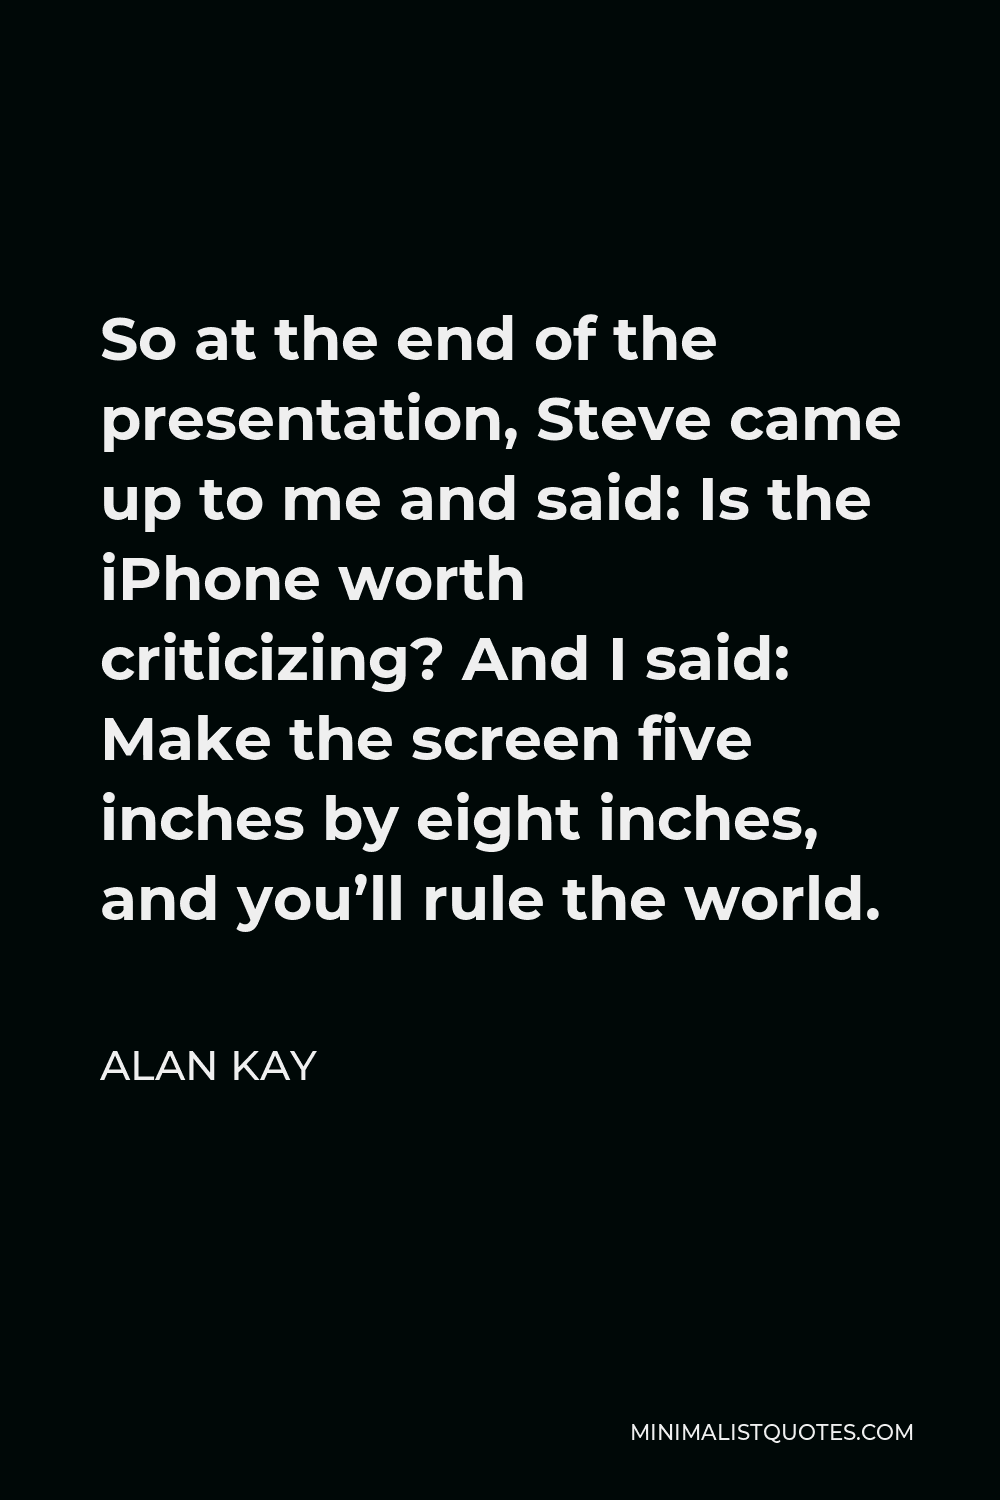 Alan Kay Quote - So at the end of the presentation, Steve came up to me and said: Is the iPhone worth criticizing? And I said: Make the screen five inches by eight inches, and you’ll rule the world.